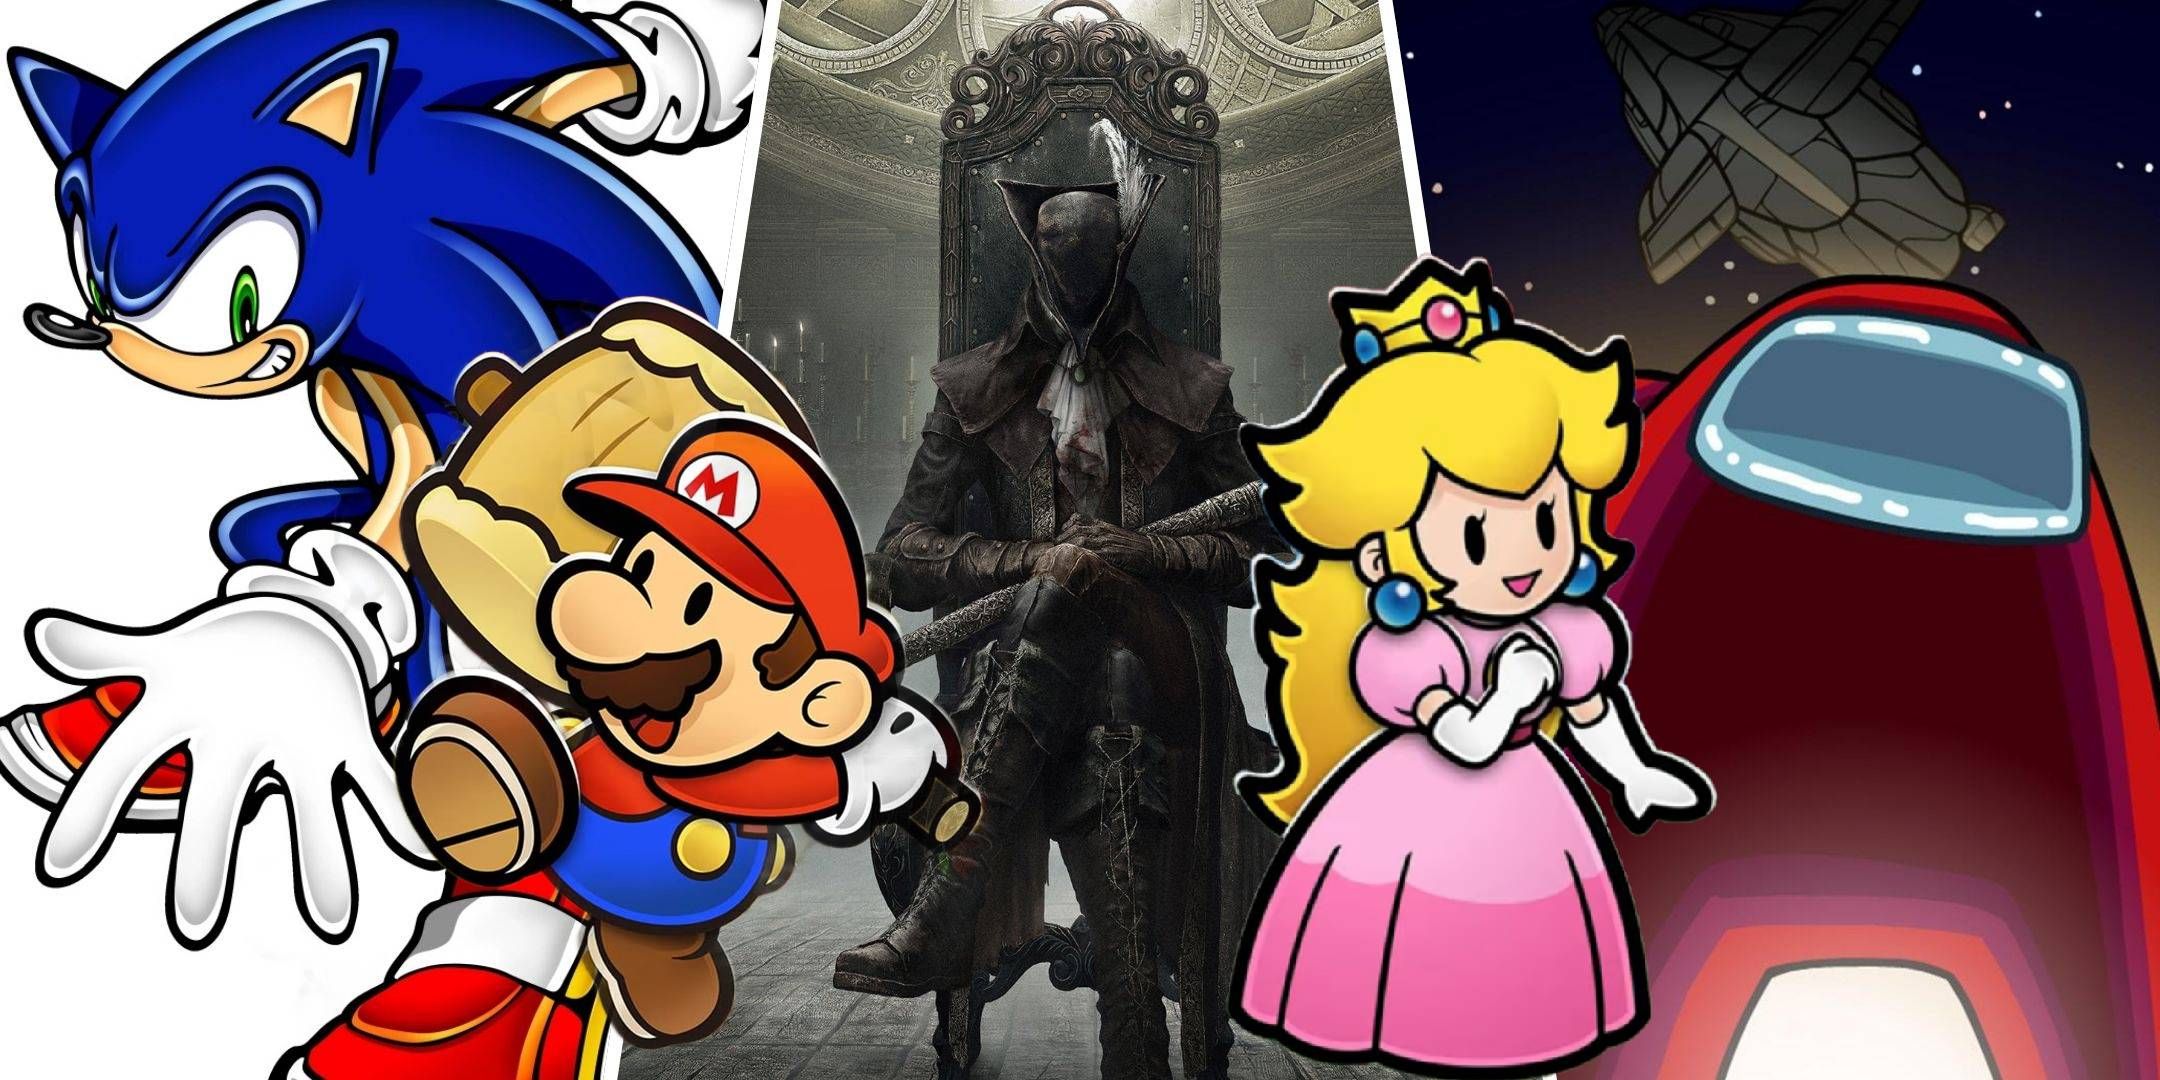 Split image of Sonic the Hedgehog the Hunter from Bloodborne and characters from Among Us with Mario and Peach from Paper Mario the Thousand Year Door remake